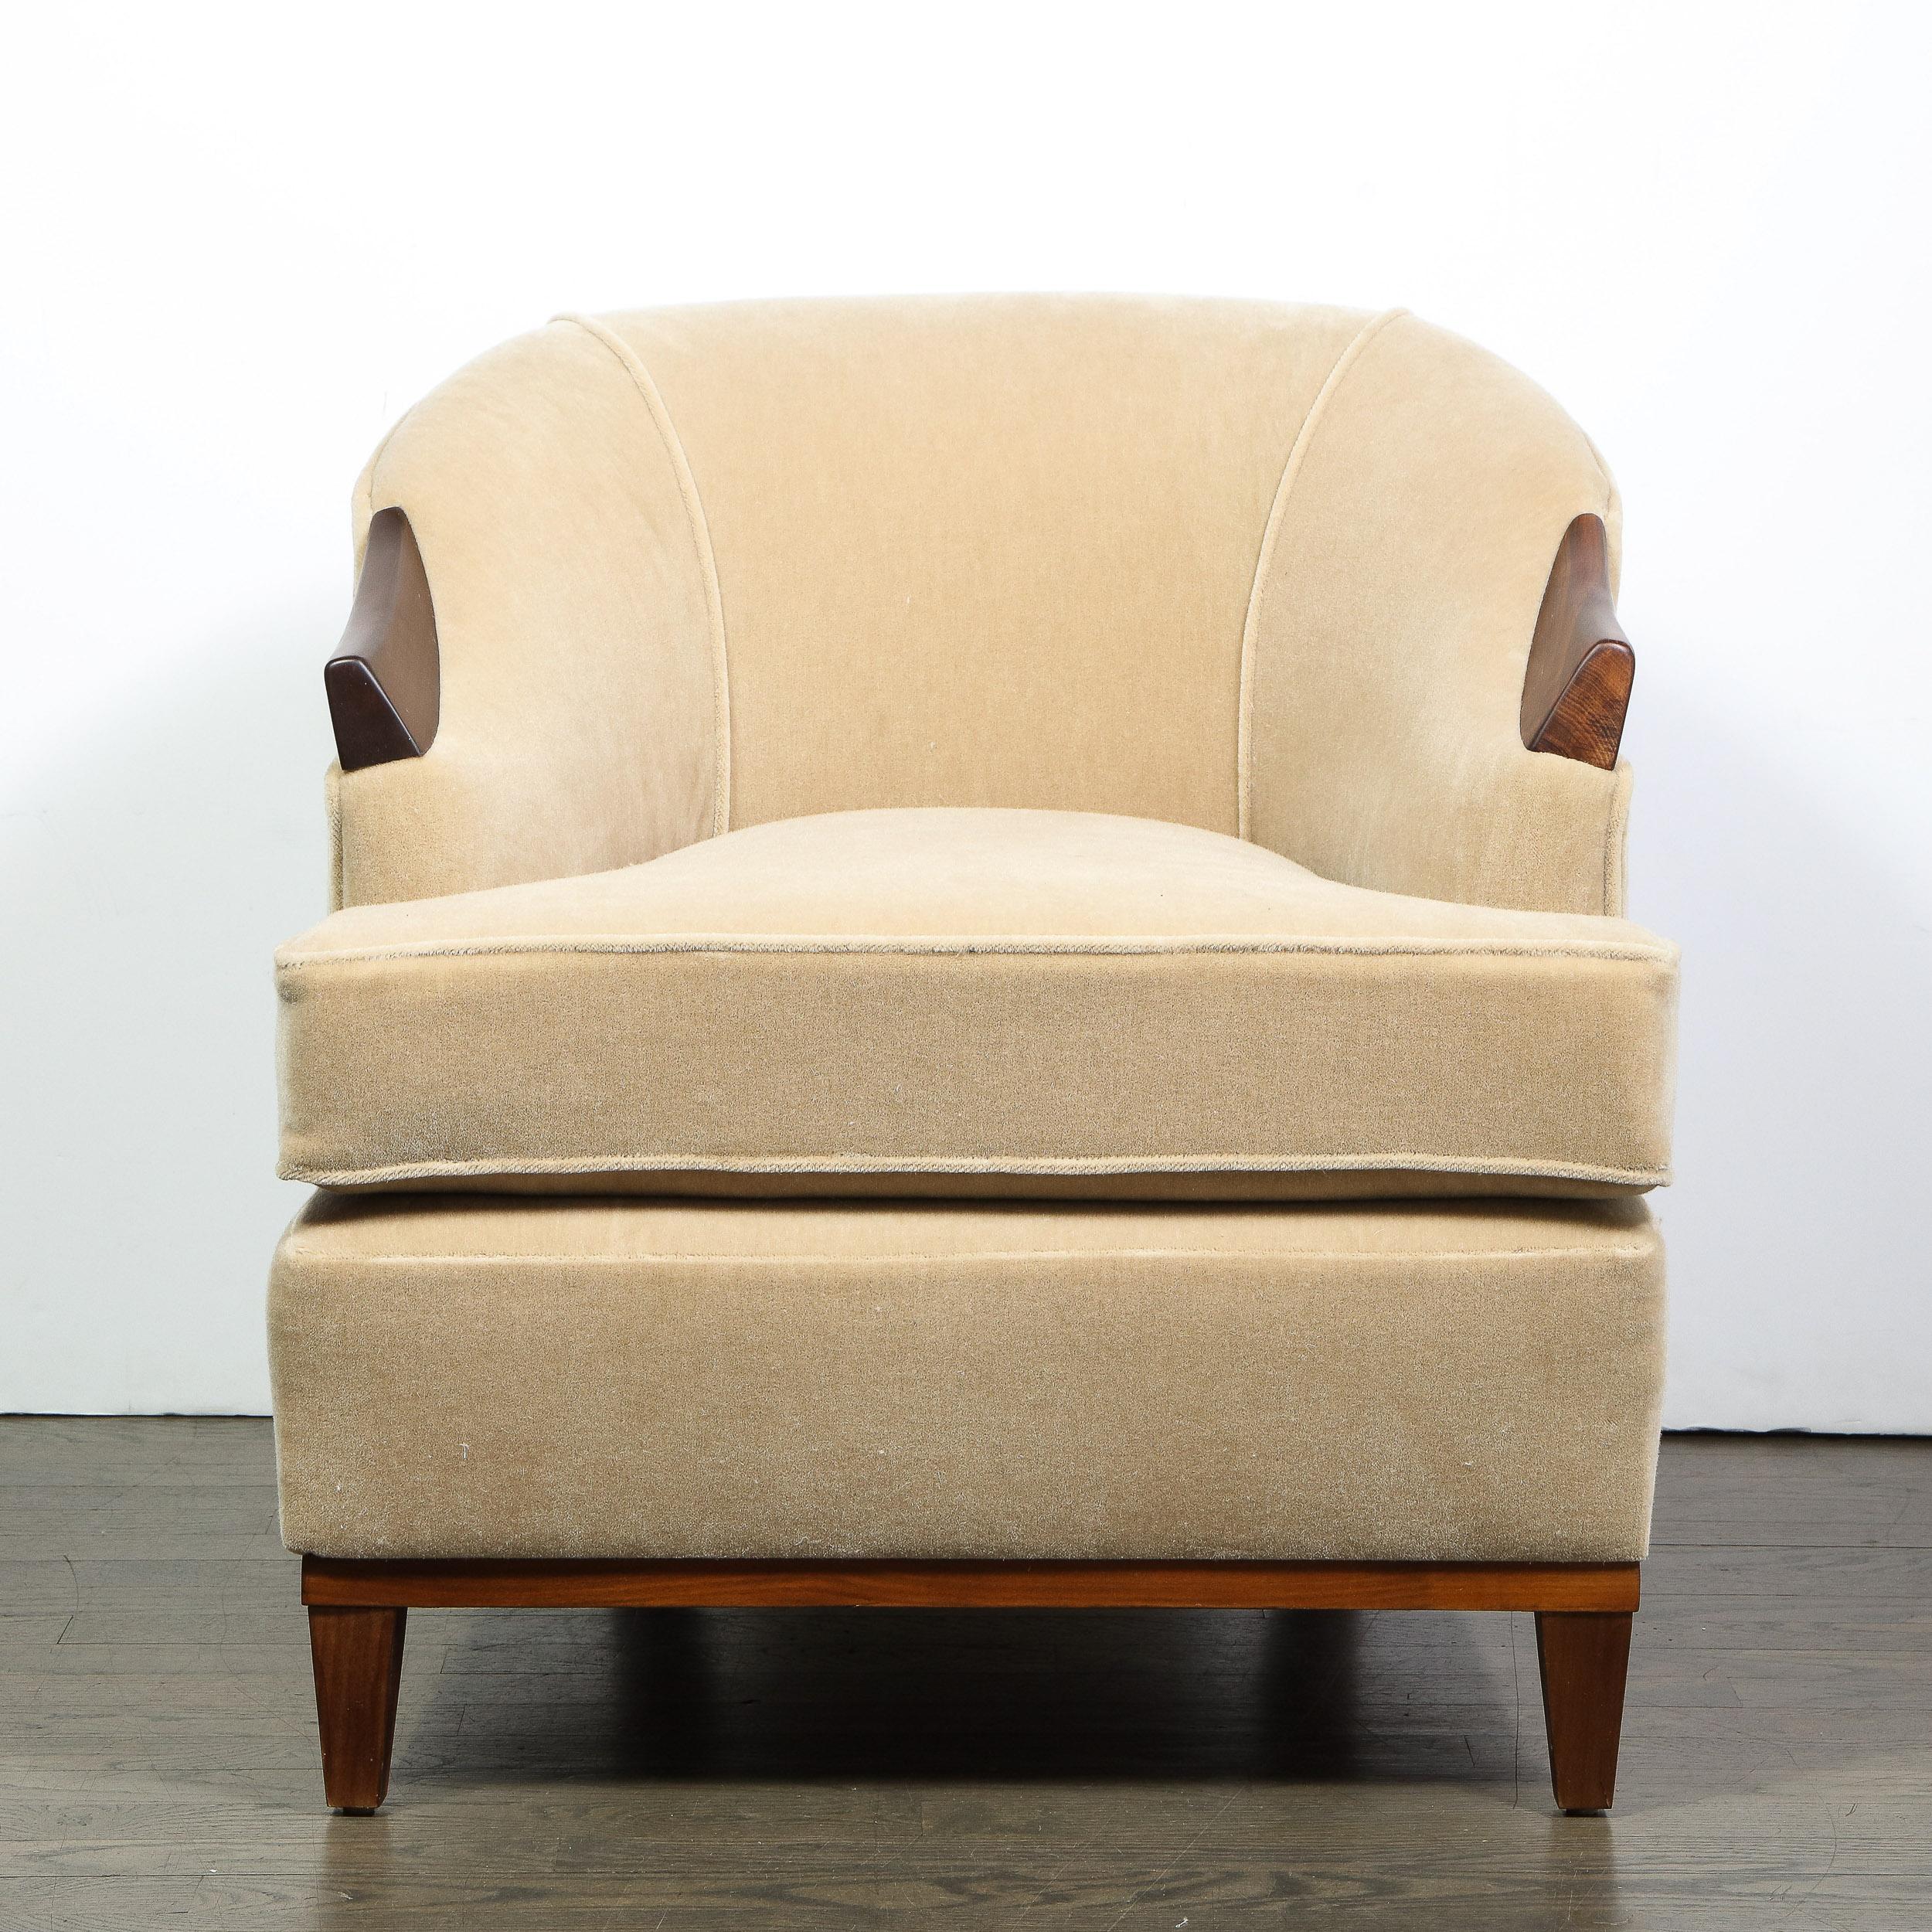 This stunning pair of Mid-Century Modern club chairs were realized in the United States, circa 1950. They featured tapered volumetric rectangular front legs, and stylized saber hind legs in hand rubbed walnut- a material that recurs on the